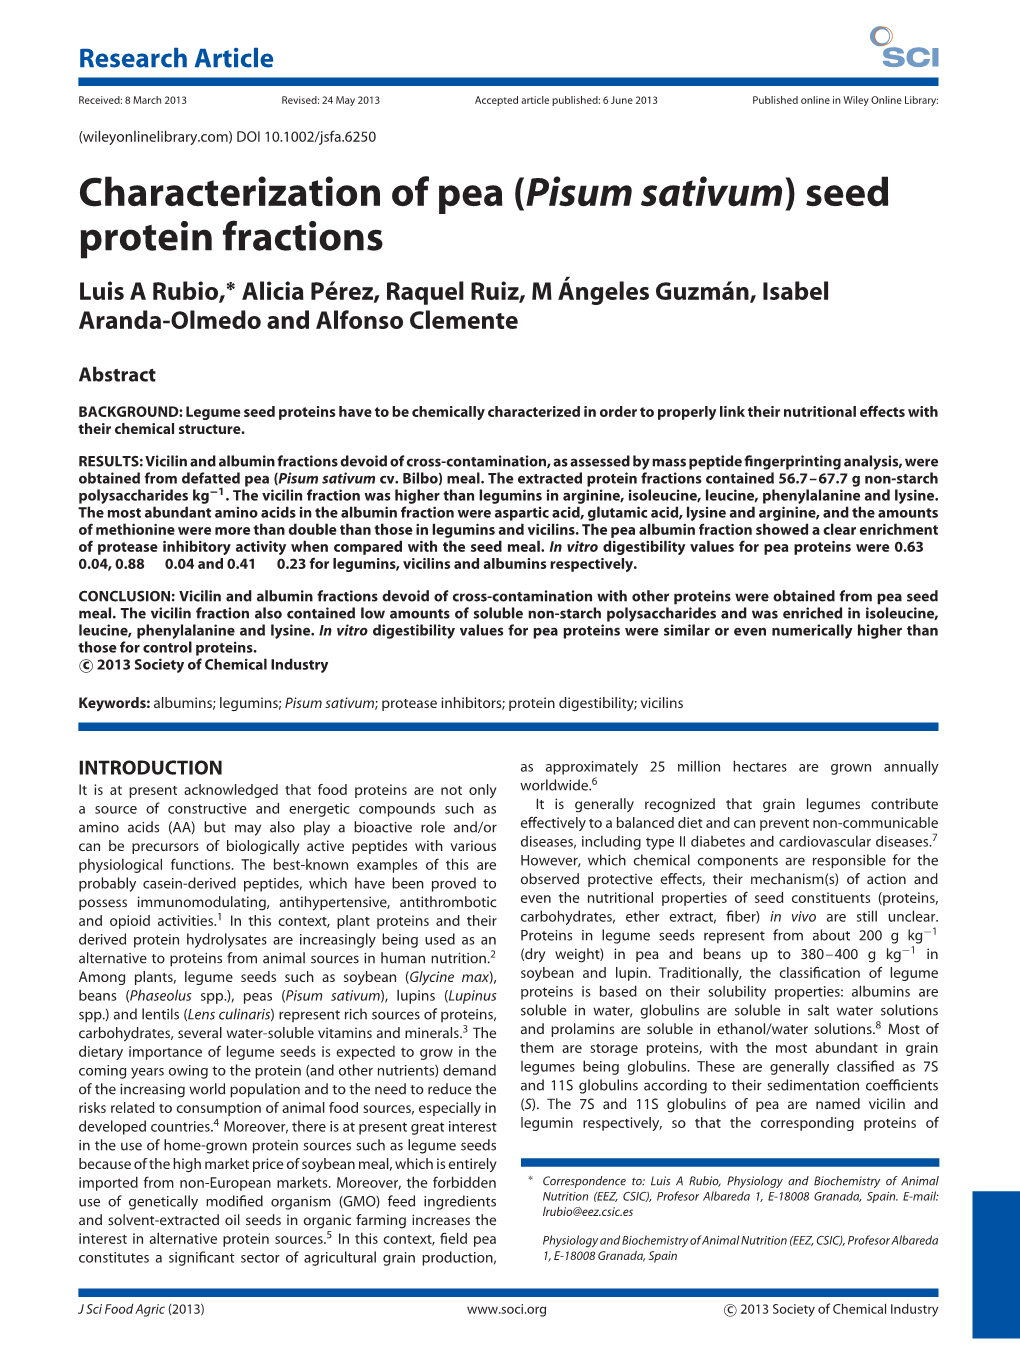 Characterization of Pea (Pisum Sativum) Seed Protein Fractions